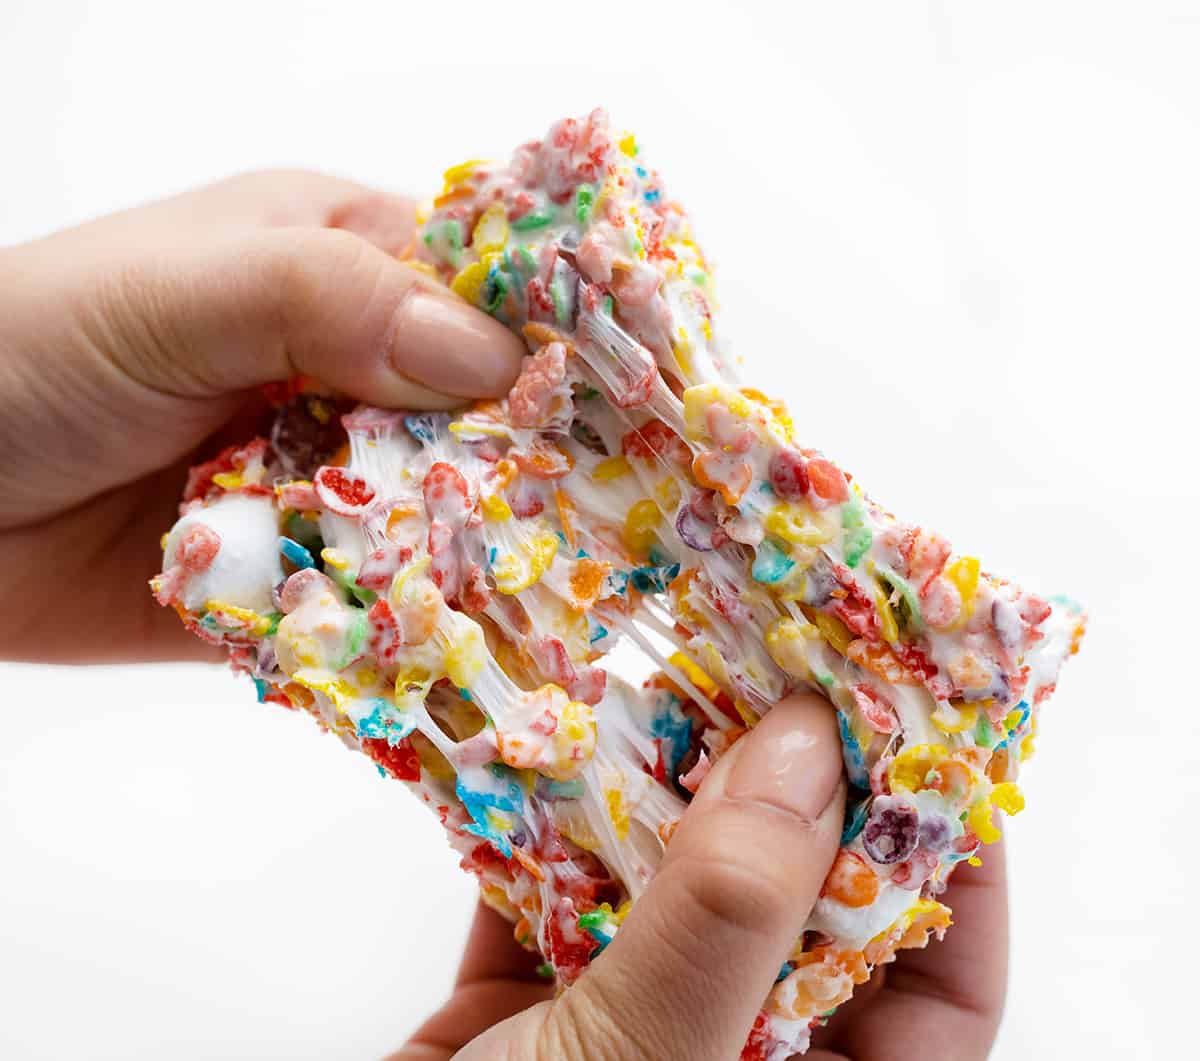 Hands pulling Apart a Soft Fruity Pebbles Treat.